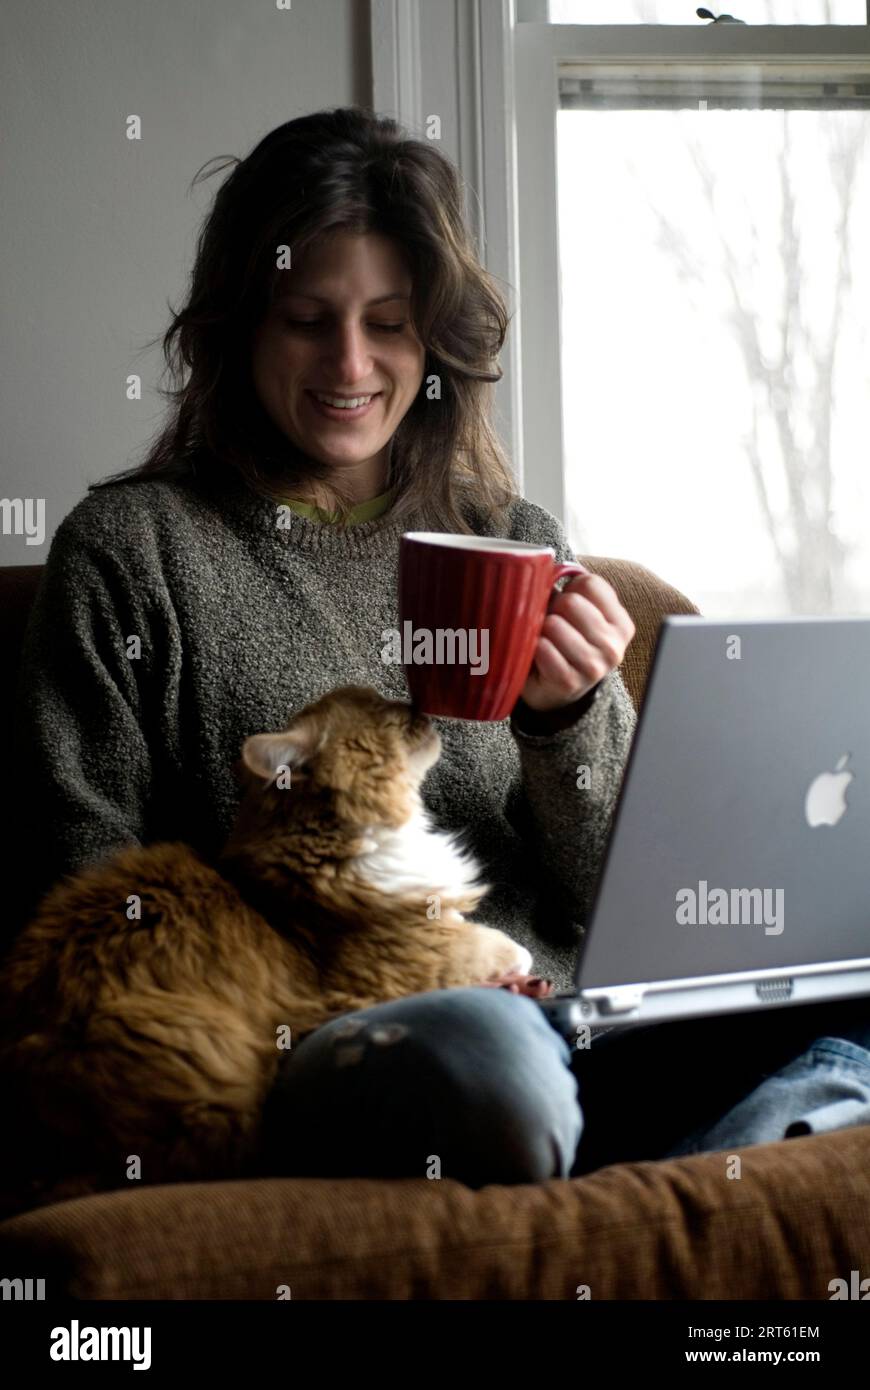 Woman relaxes on a chair with her cat while working on a laptop. Stock Photo